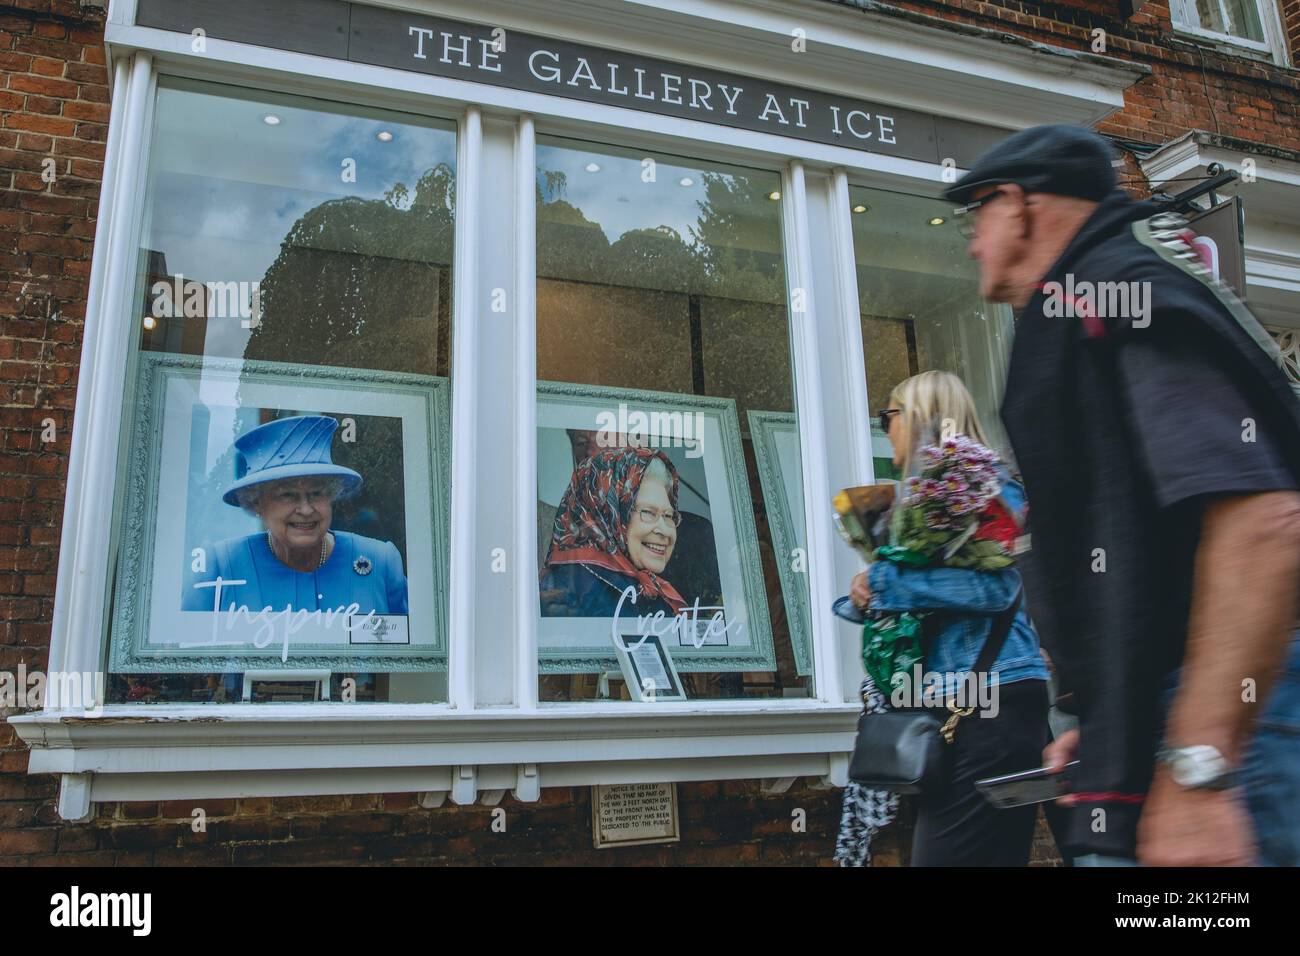 Windsor, UK. 14th September, 2022. Members of the public pass portraits of Queen Elizabeth II displayed in the windows of an art gallery. Queen Elizabeth II, the UK's longest-serving monarch, died at Balmoral aged 96 on 8th September after a reign lasting 70 years and will be buried in the King George VI memorial chapel in Windsor following a state funeral in Westminster Abbey on 19th September. Credit: Mark Kerrison/Alamy Live News Stock Photo